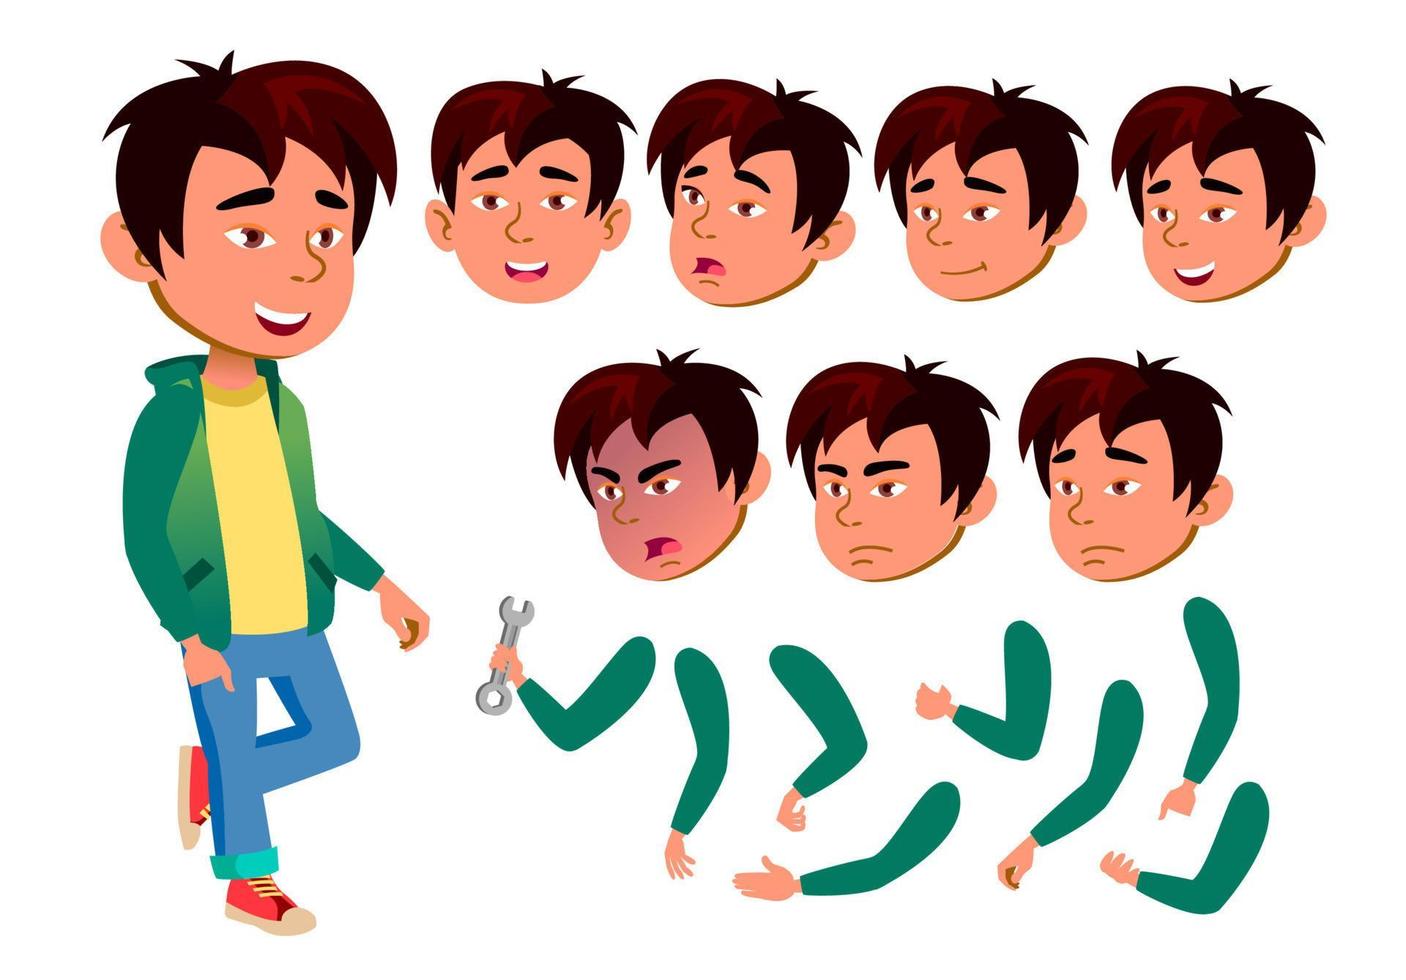 Asian Teen Boy Vector. Teenager. Emotional, Pose. Face Emotions, Various Gestures. Animation Creation Set. Isolated Flat Cartoon Character Illustration vector